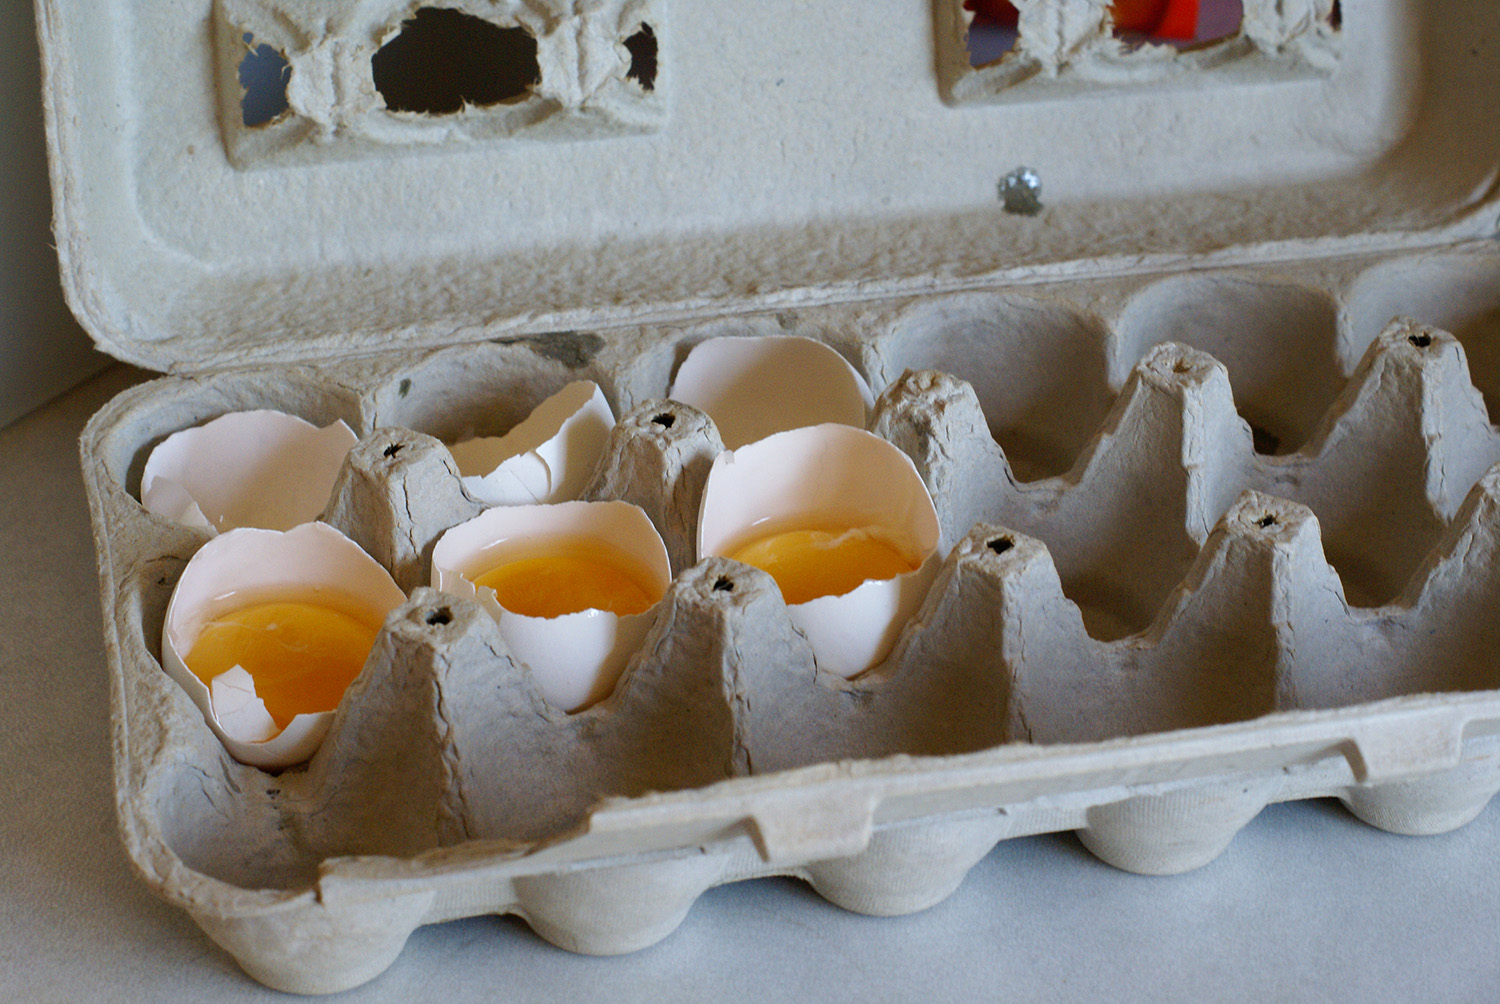 example of egg_cartons_soiled